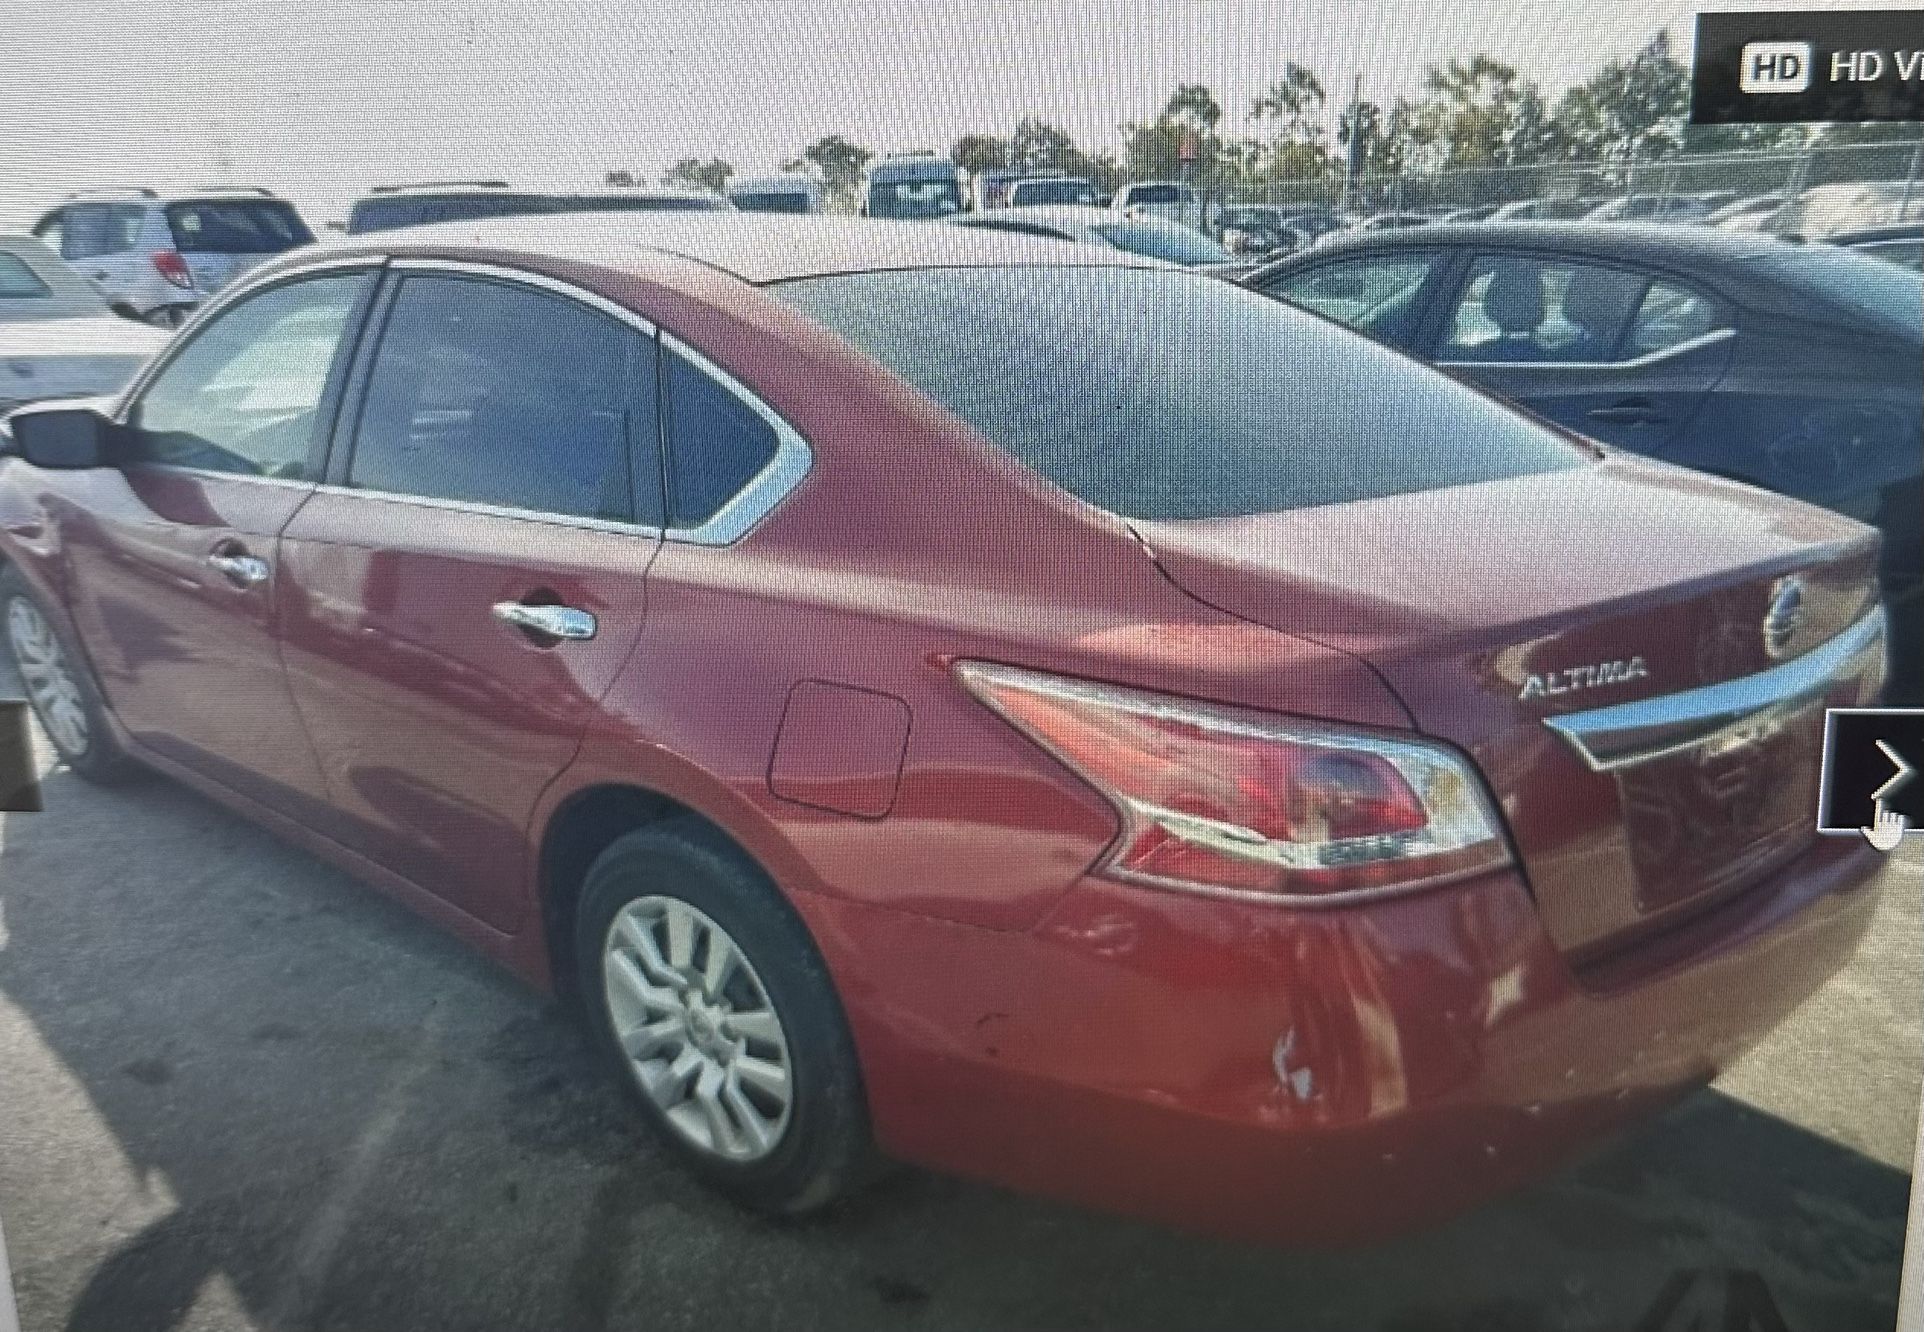 2015 Nissan Altima(Parts Only)